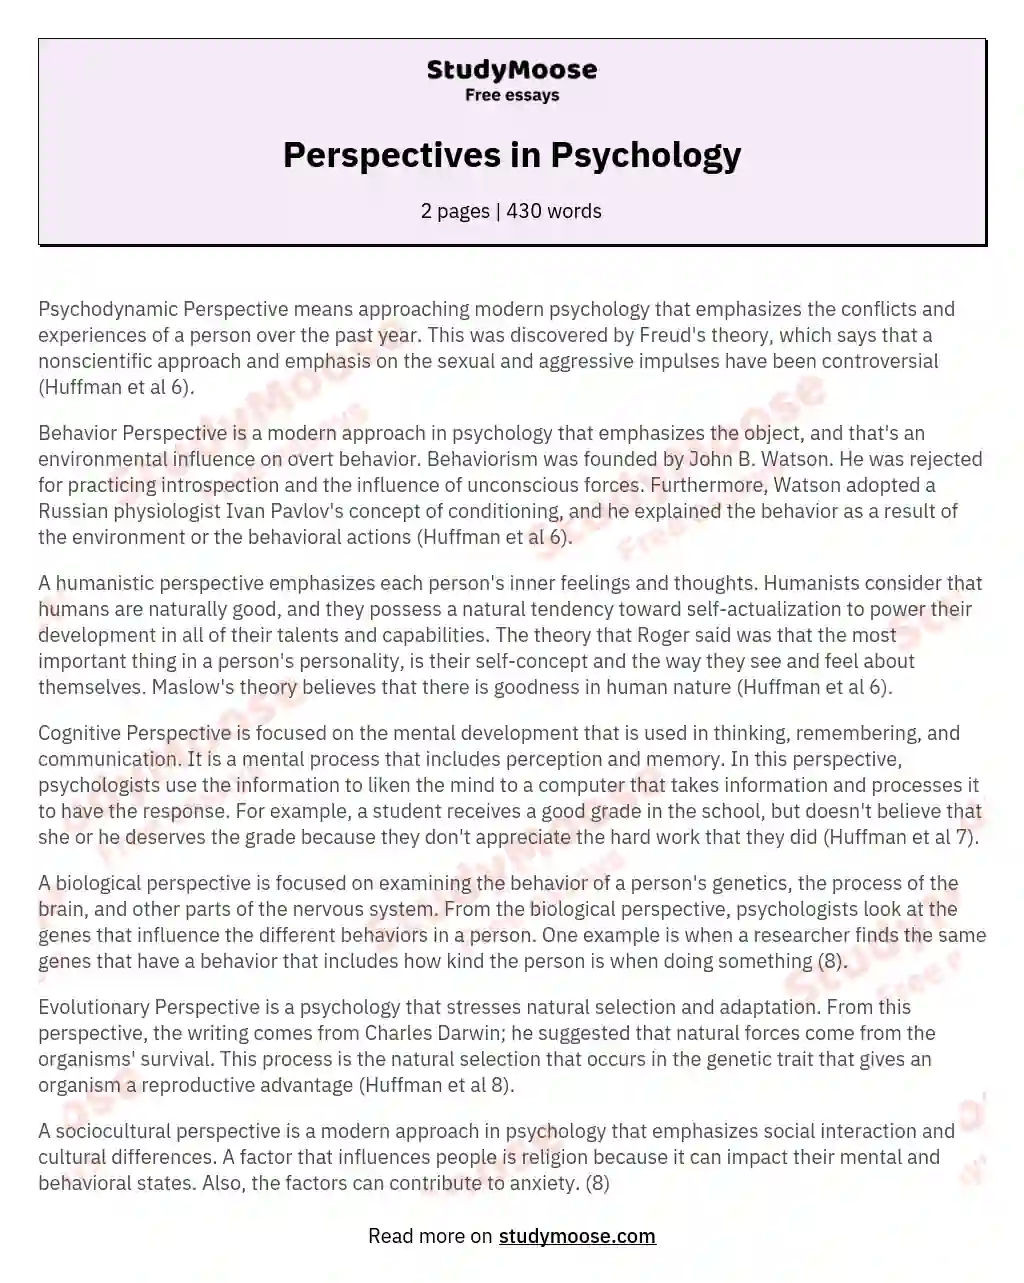 Perspectives in Psychology essay